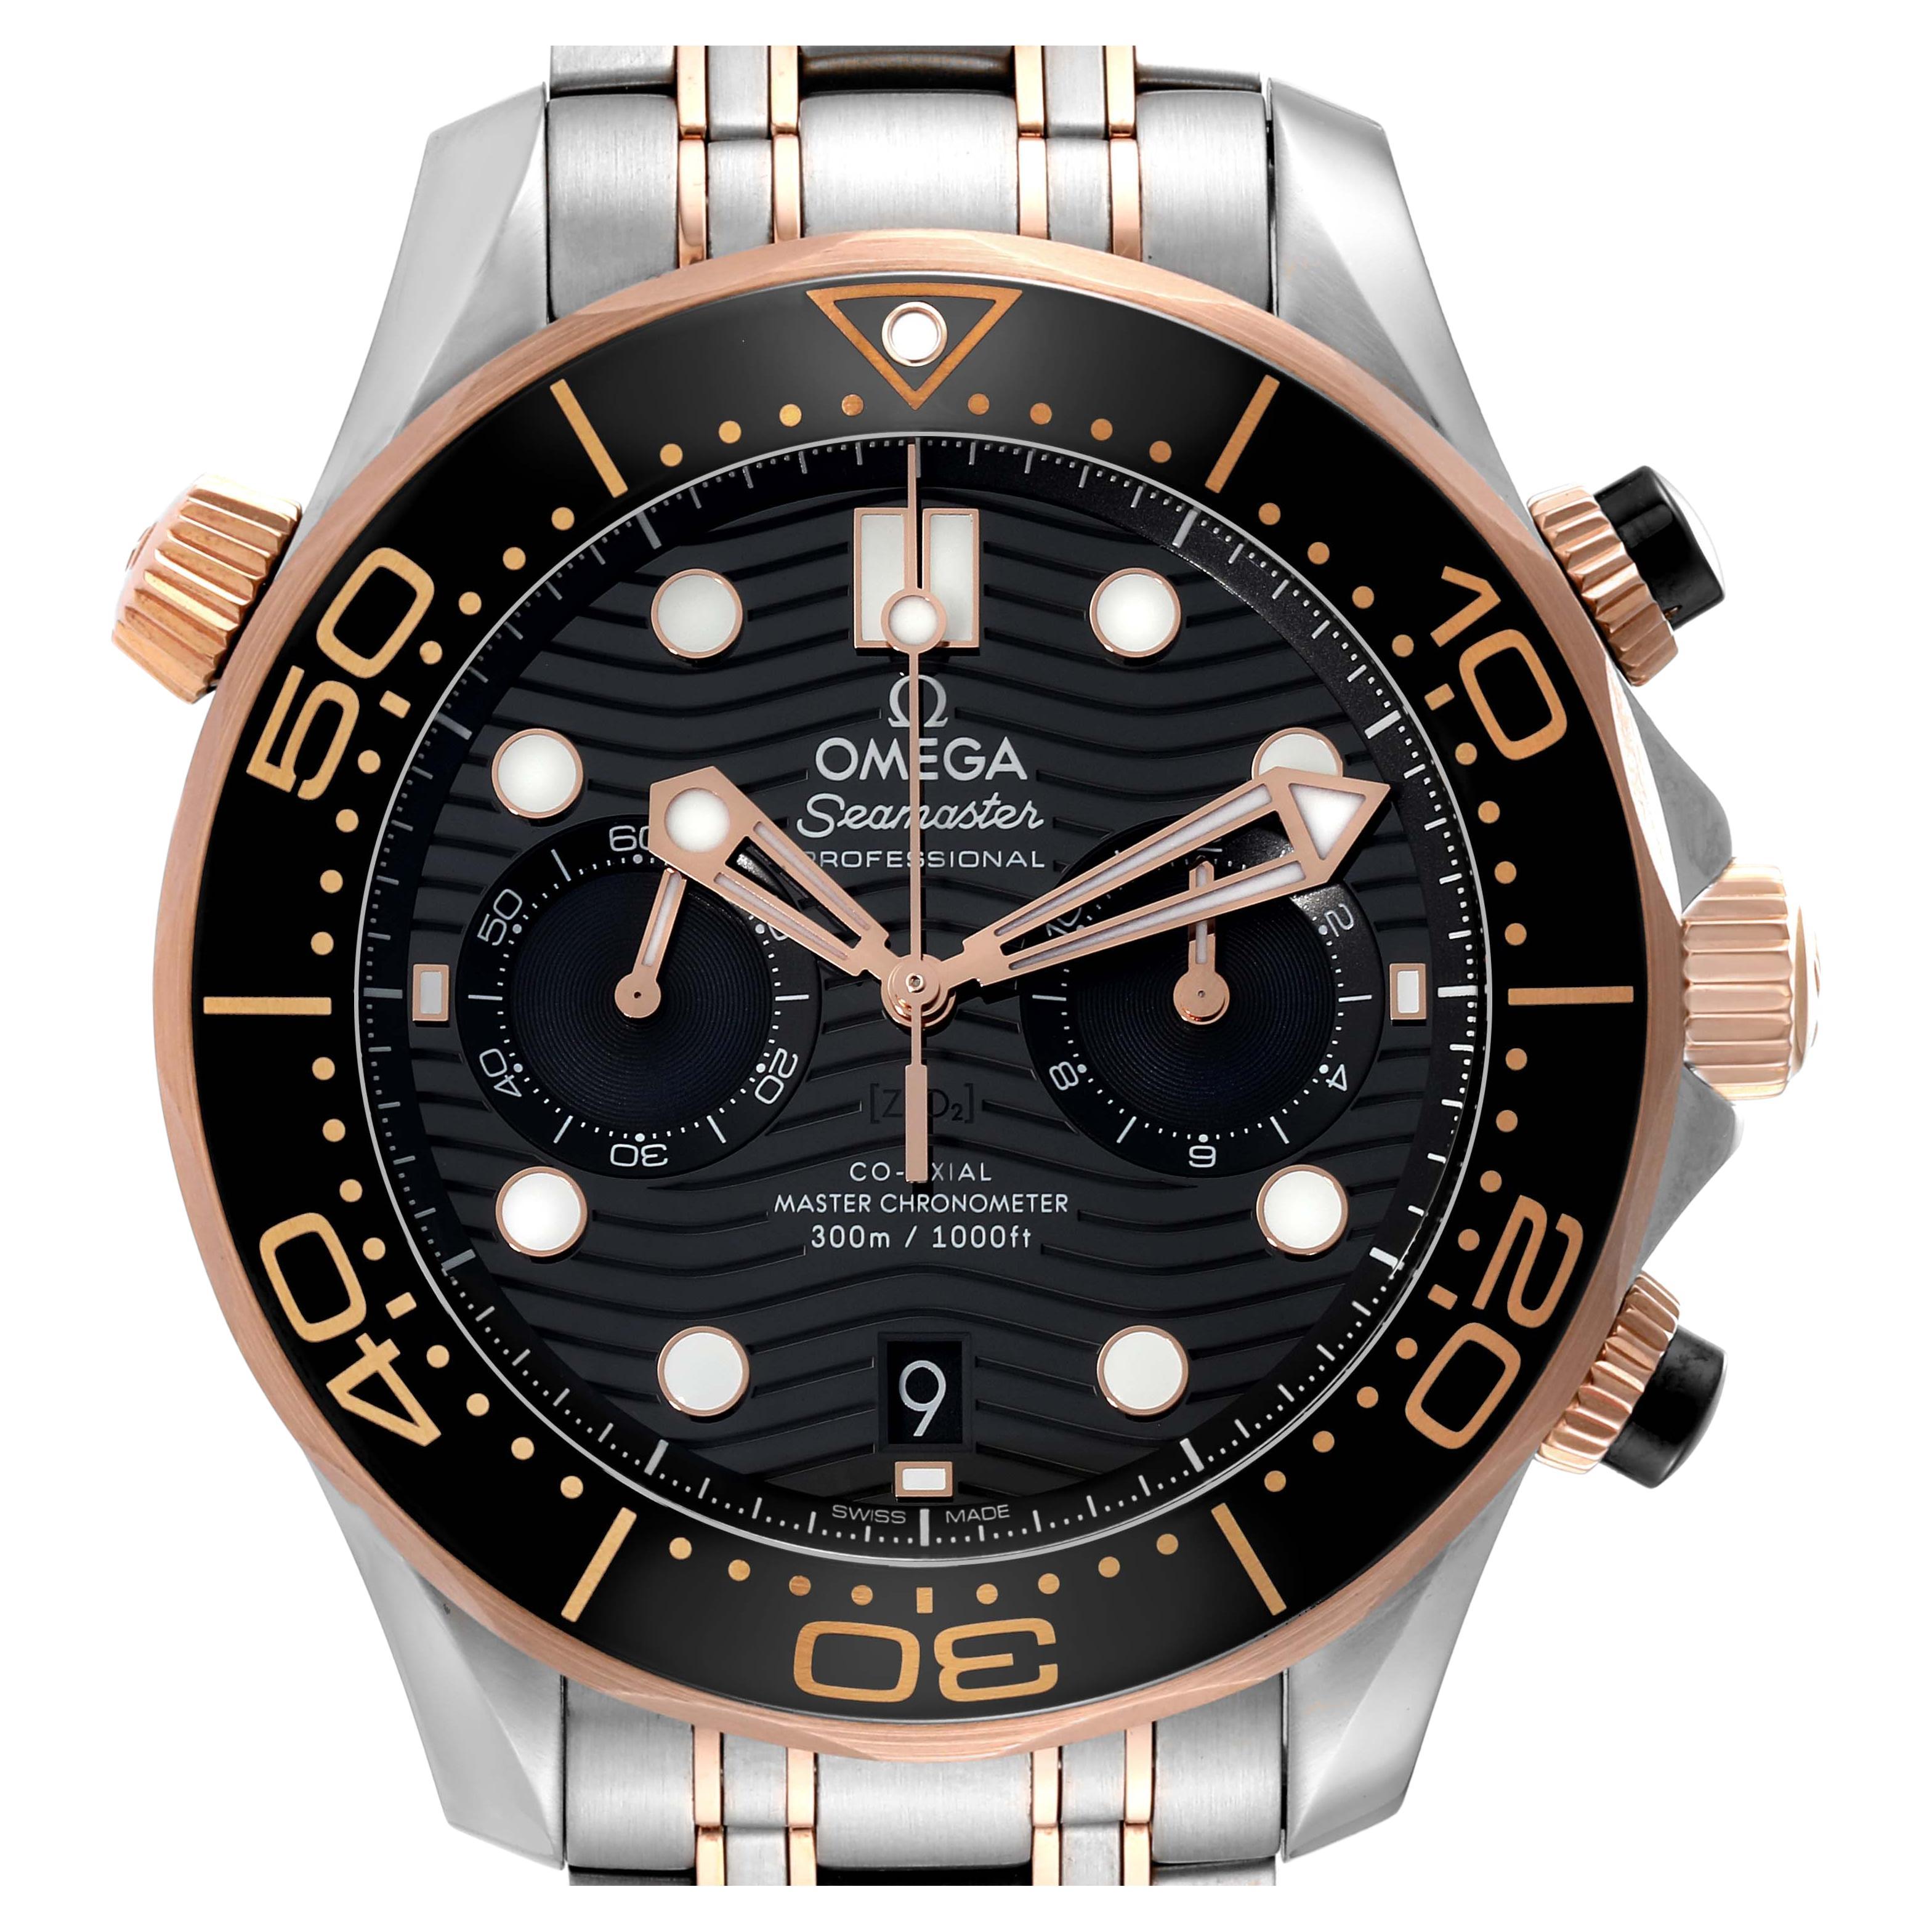 Omega Seamaster Diver Steel Rose Gold Mens Watch 210.20.44.51.01.001 Box Card For Sale